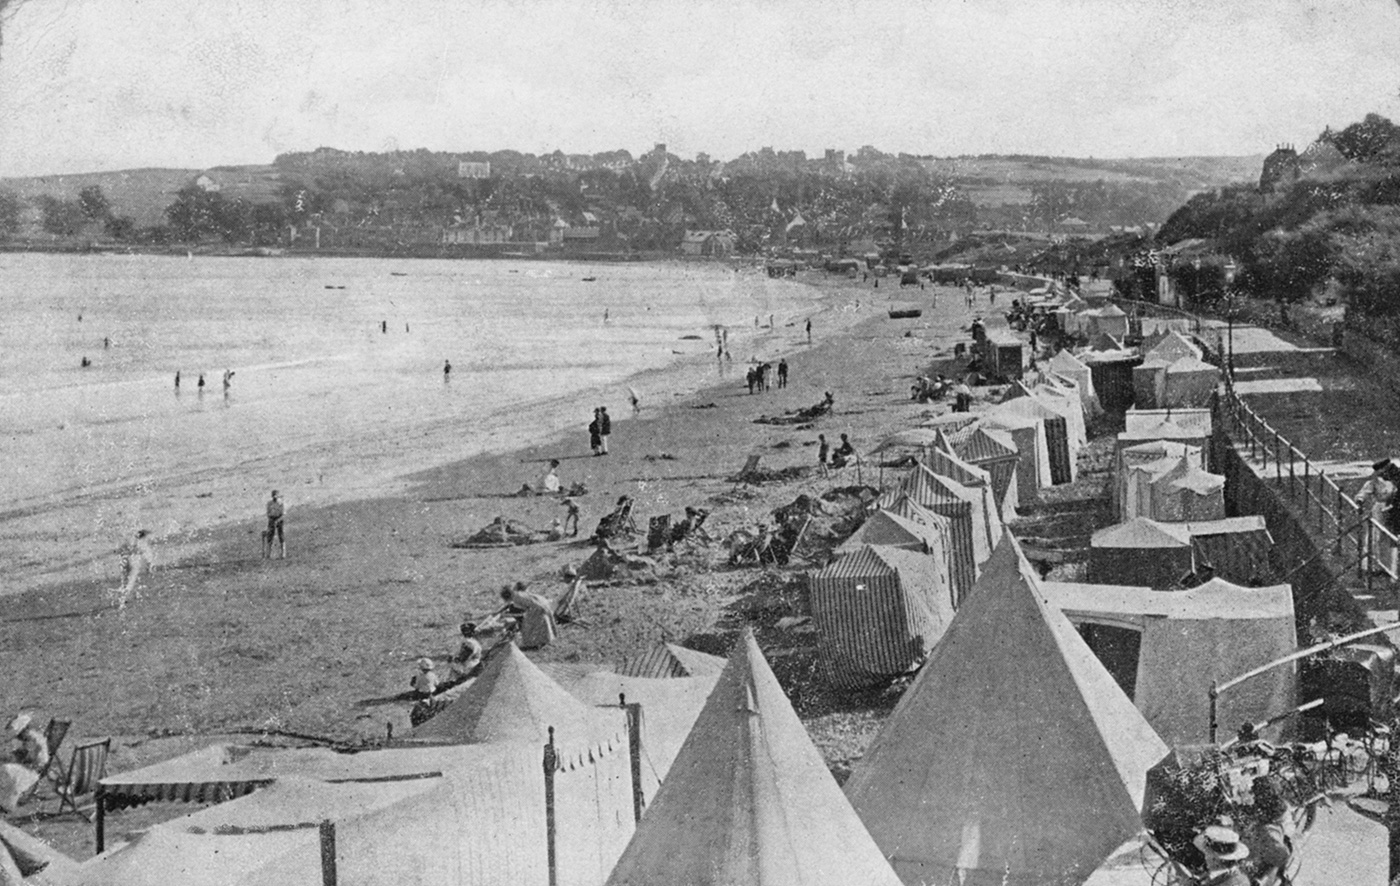 Tents on the beach